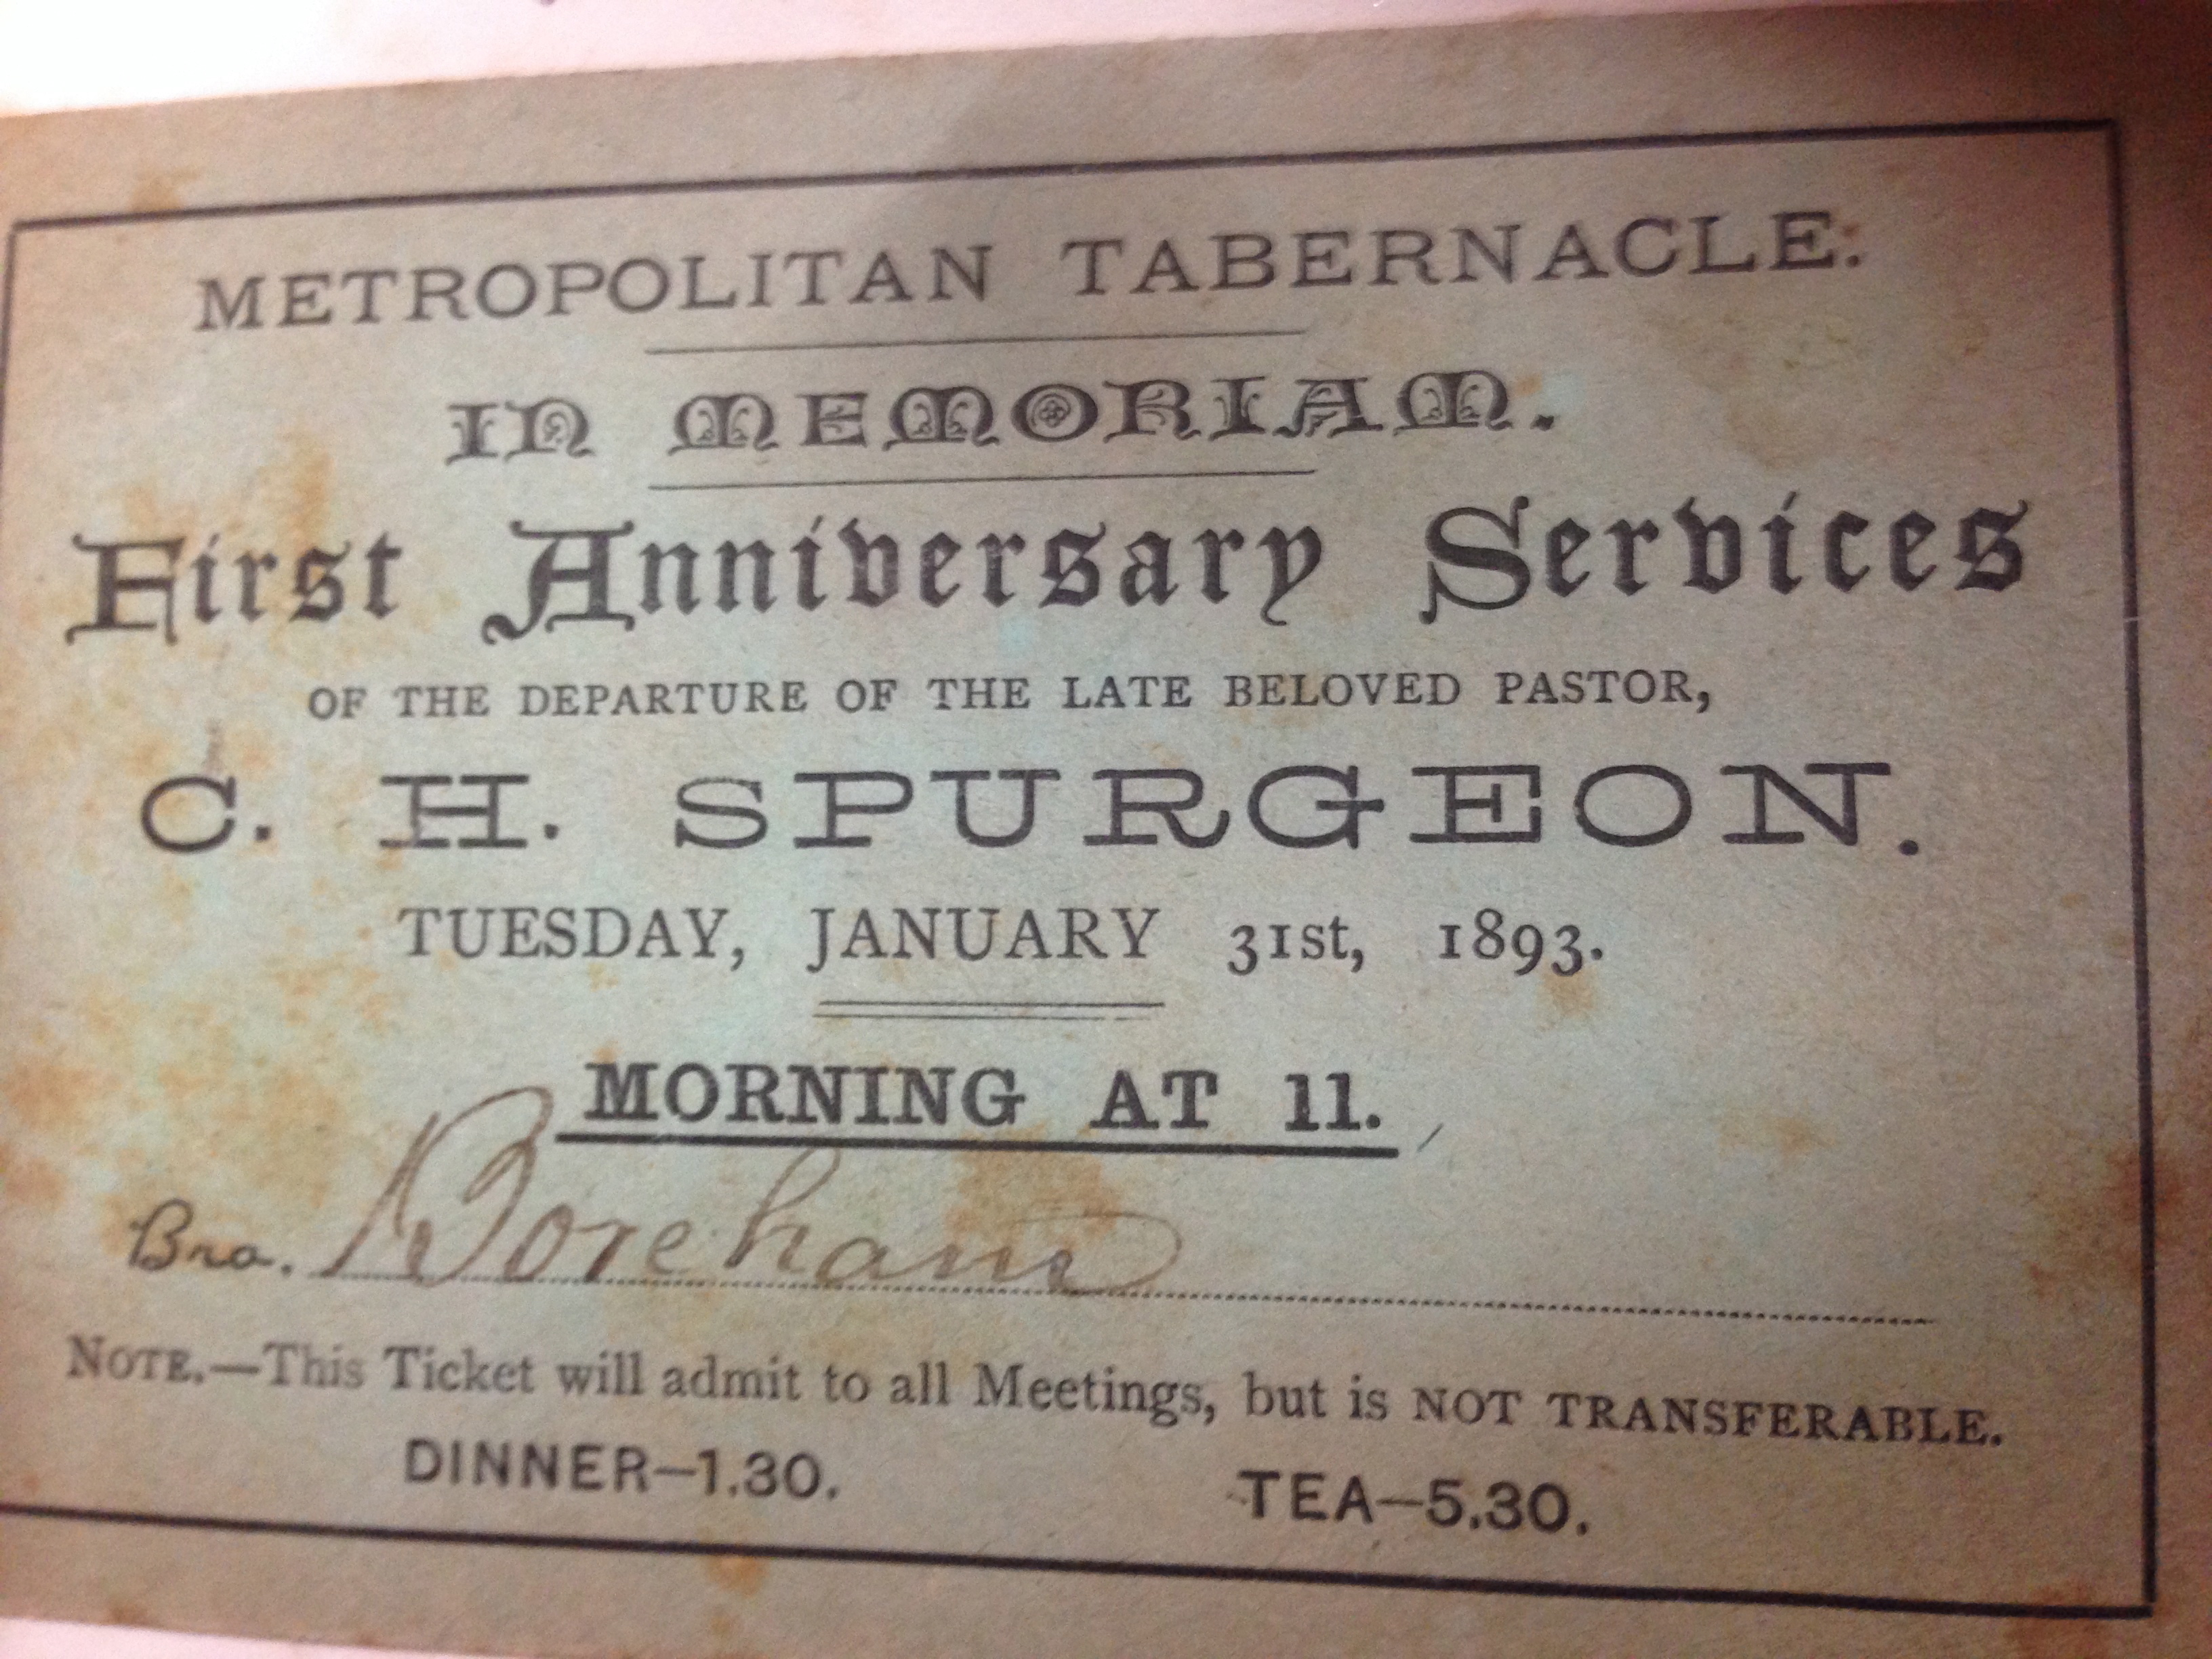 FWB's First anniversary of the death of Charles Haddon Spurgeon memorial ticket